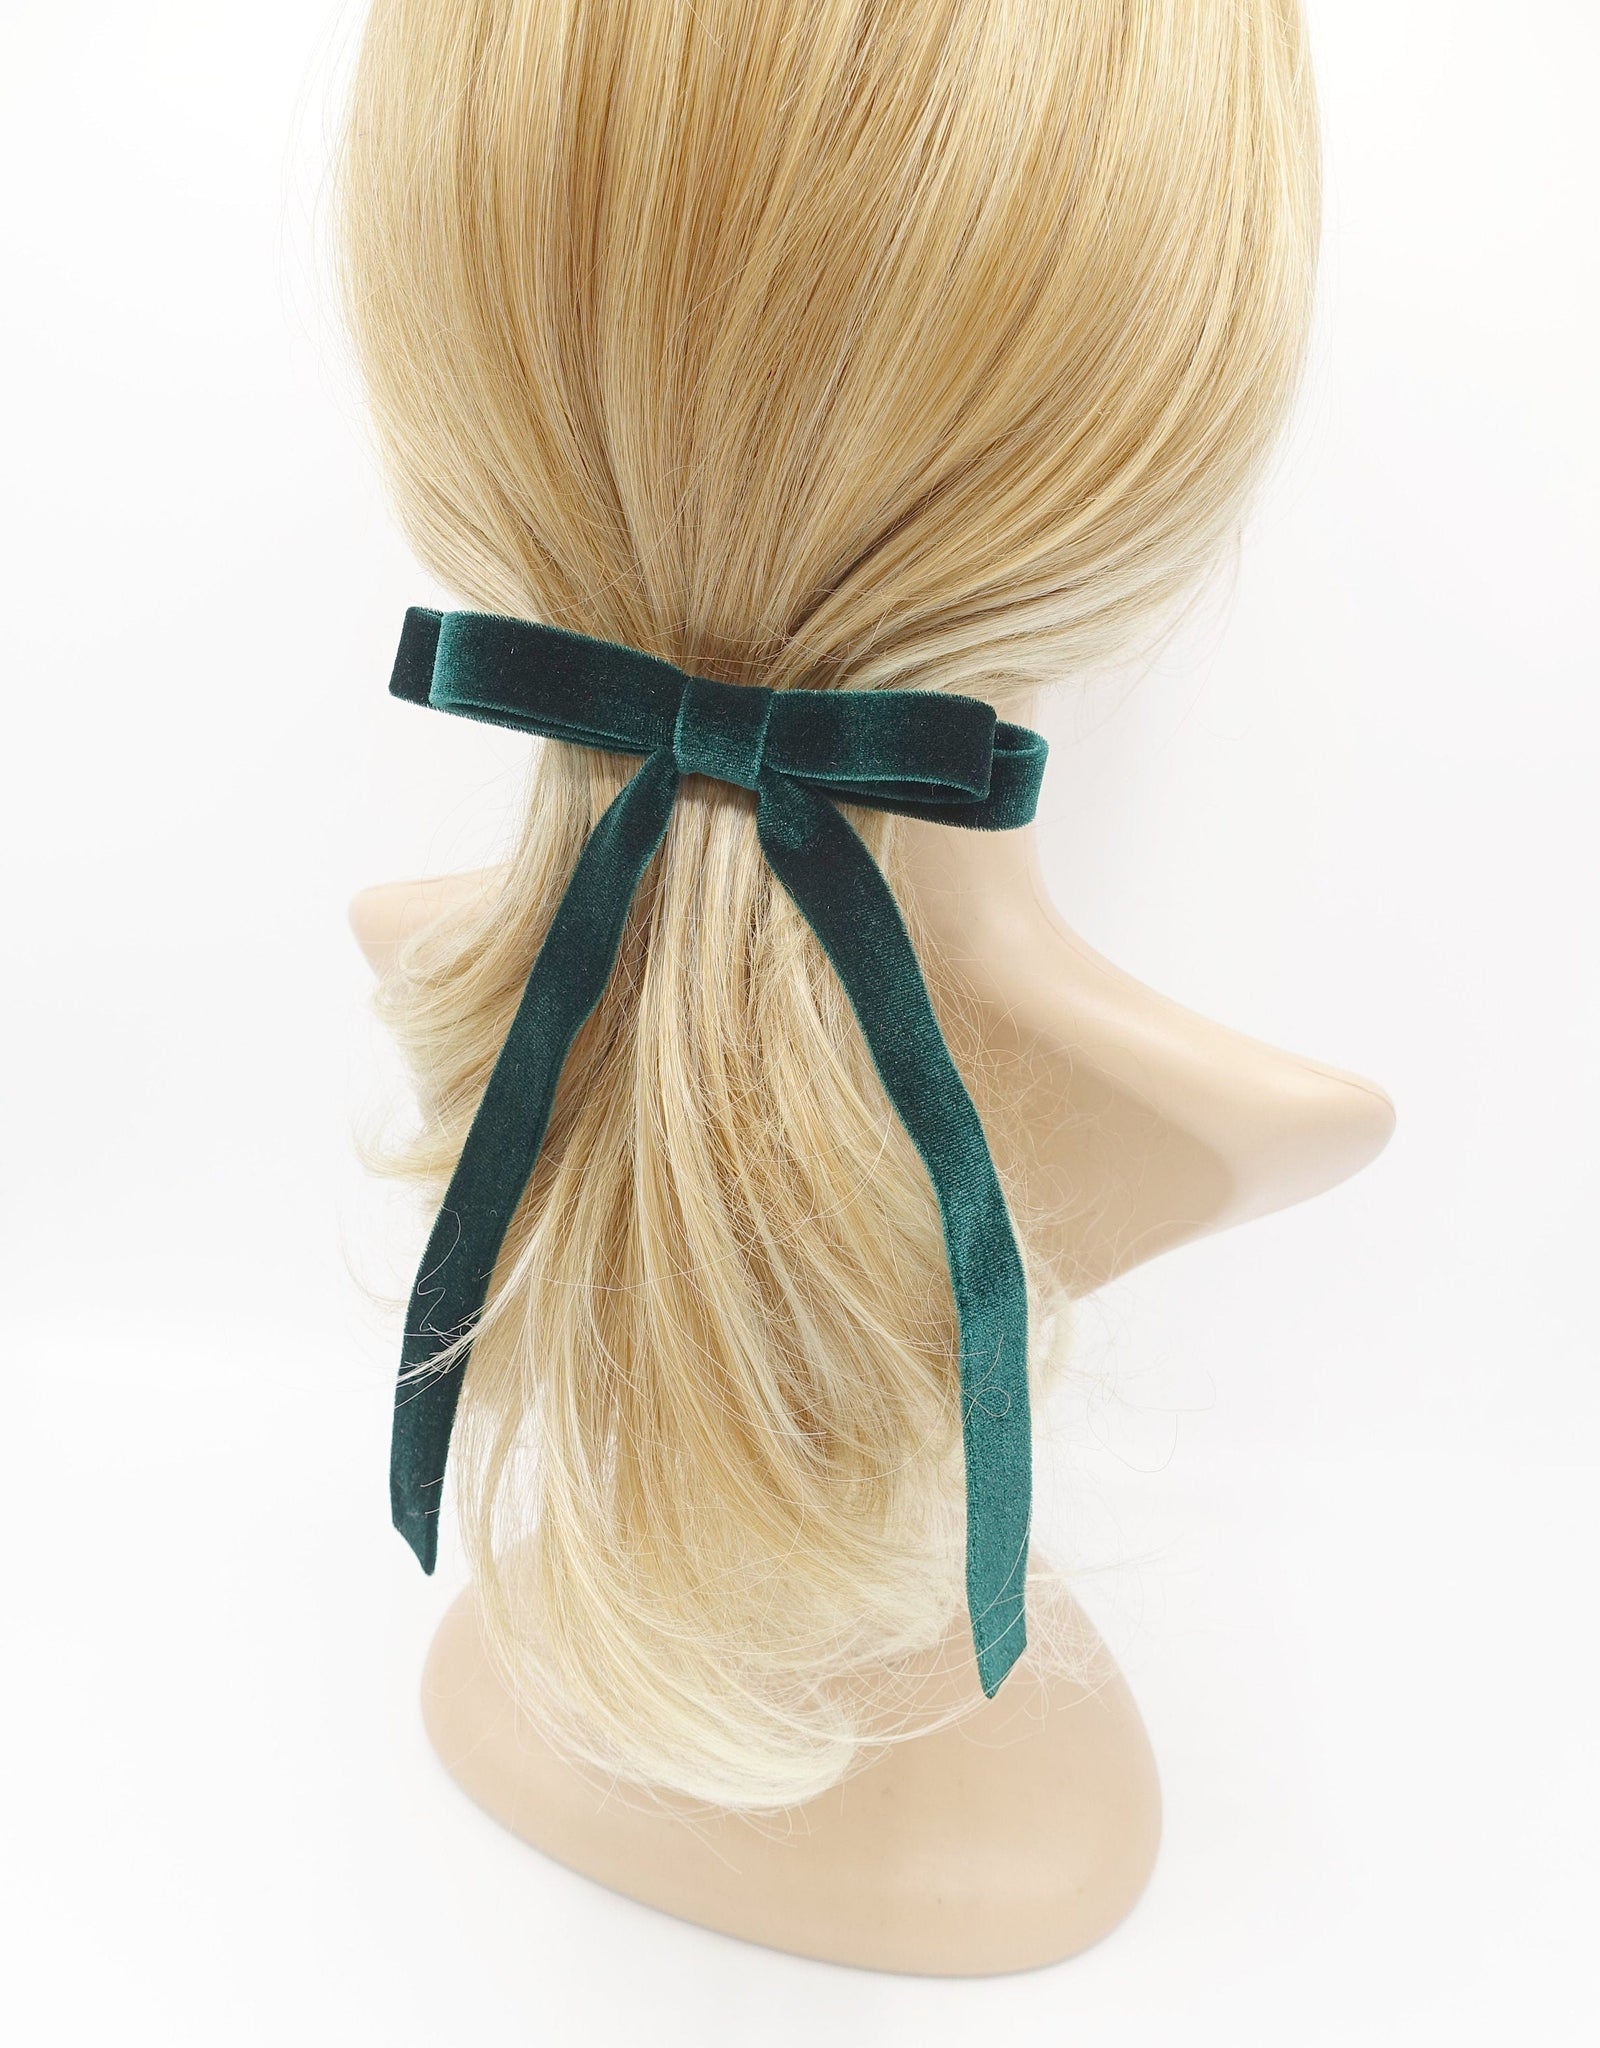 veryshine.com Barrette (Bow) Green thin velvet tail hair bow casual style french hair barrette